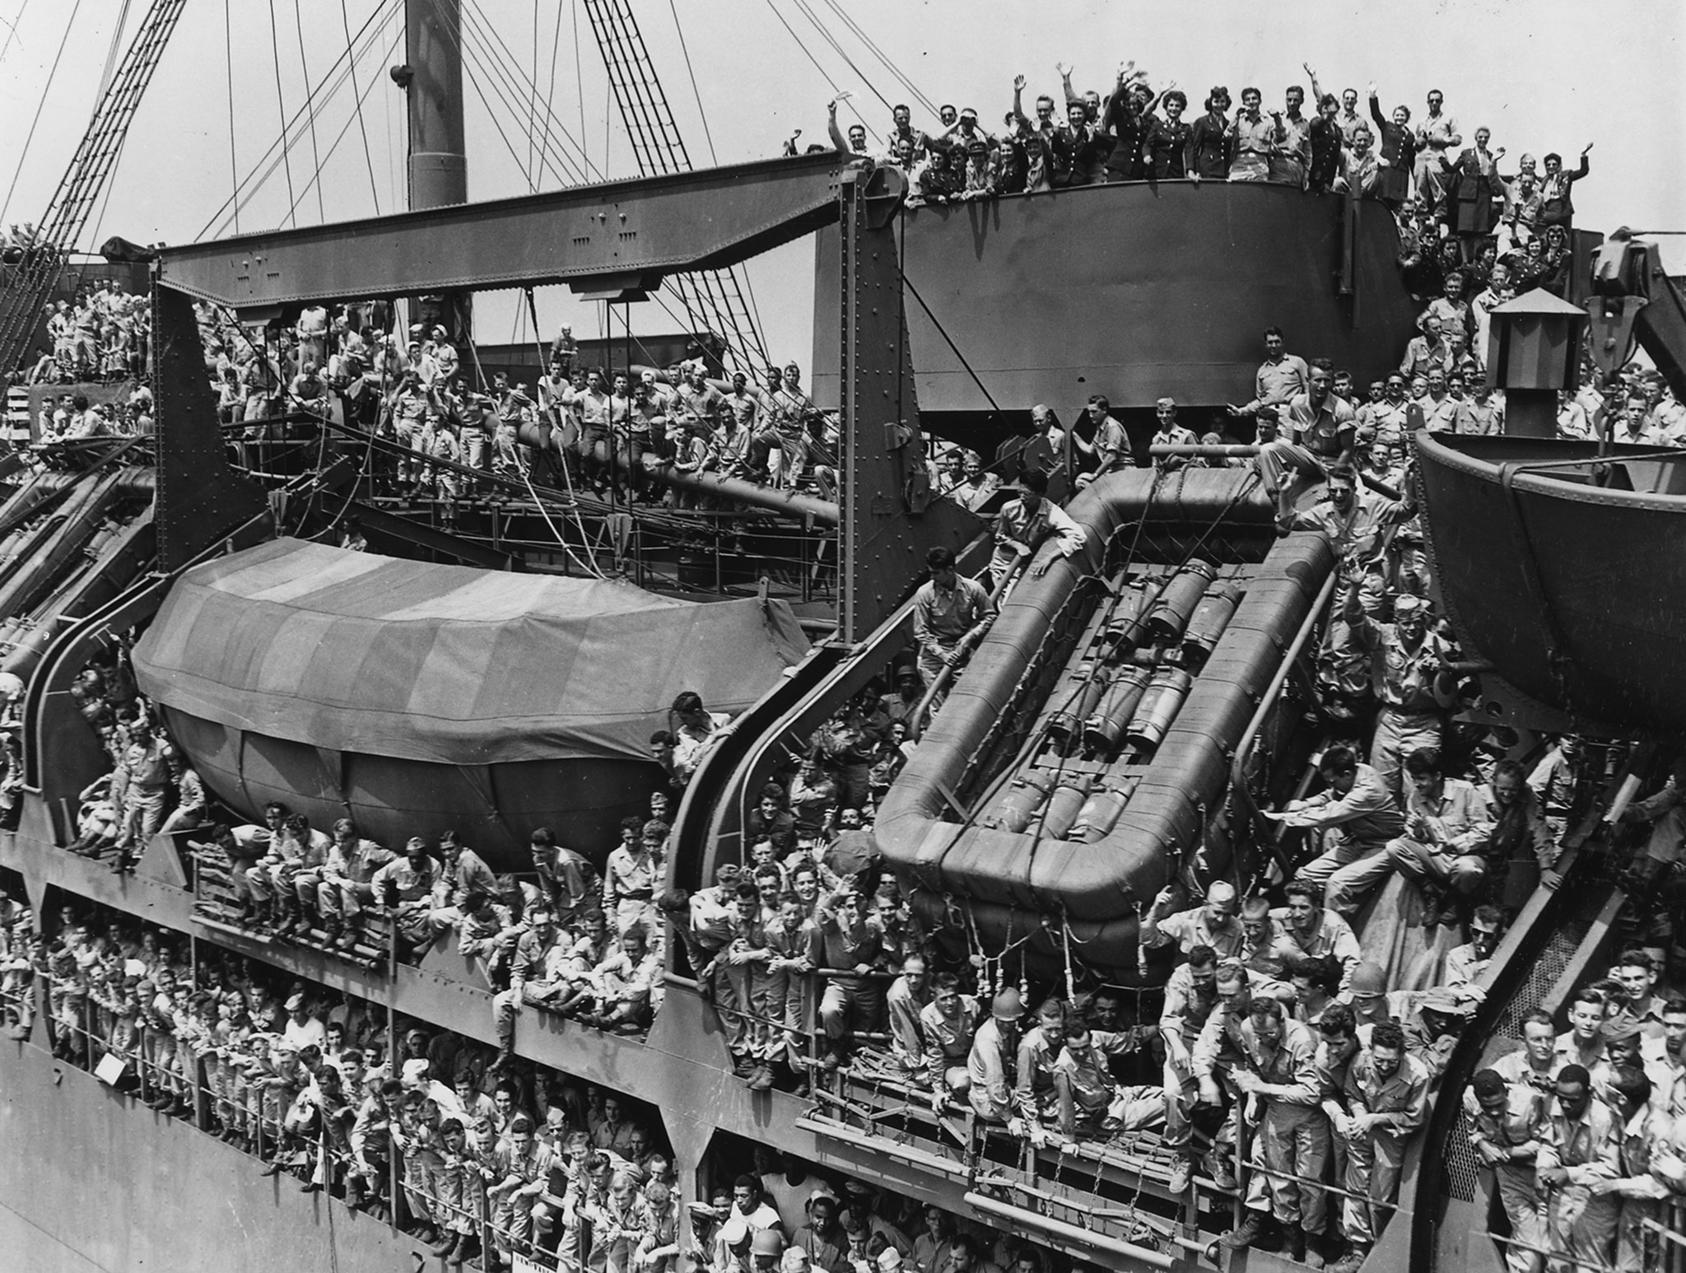 U.S. troops return to New York aboard the USS General Harry Taylor from their service in World War II. Veterans of that war later led in the campaign to establish the U.S. Institute of Peace. (National Archives)